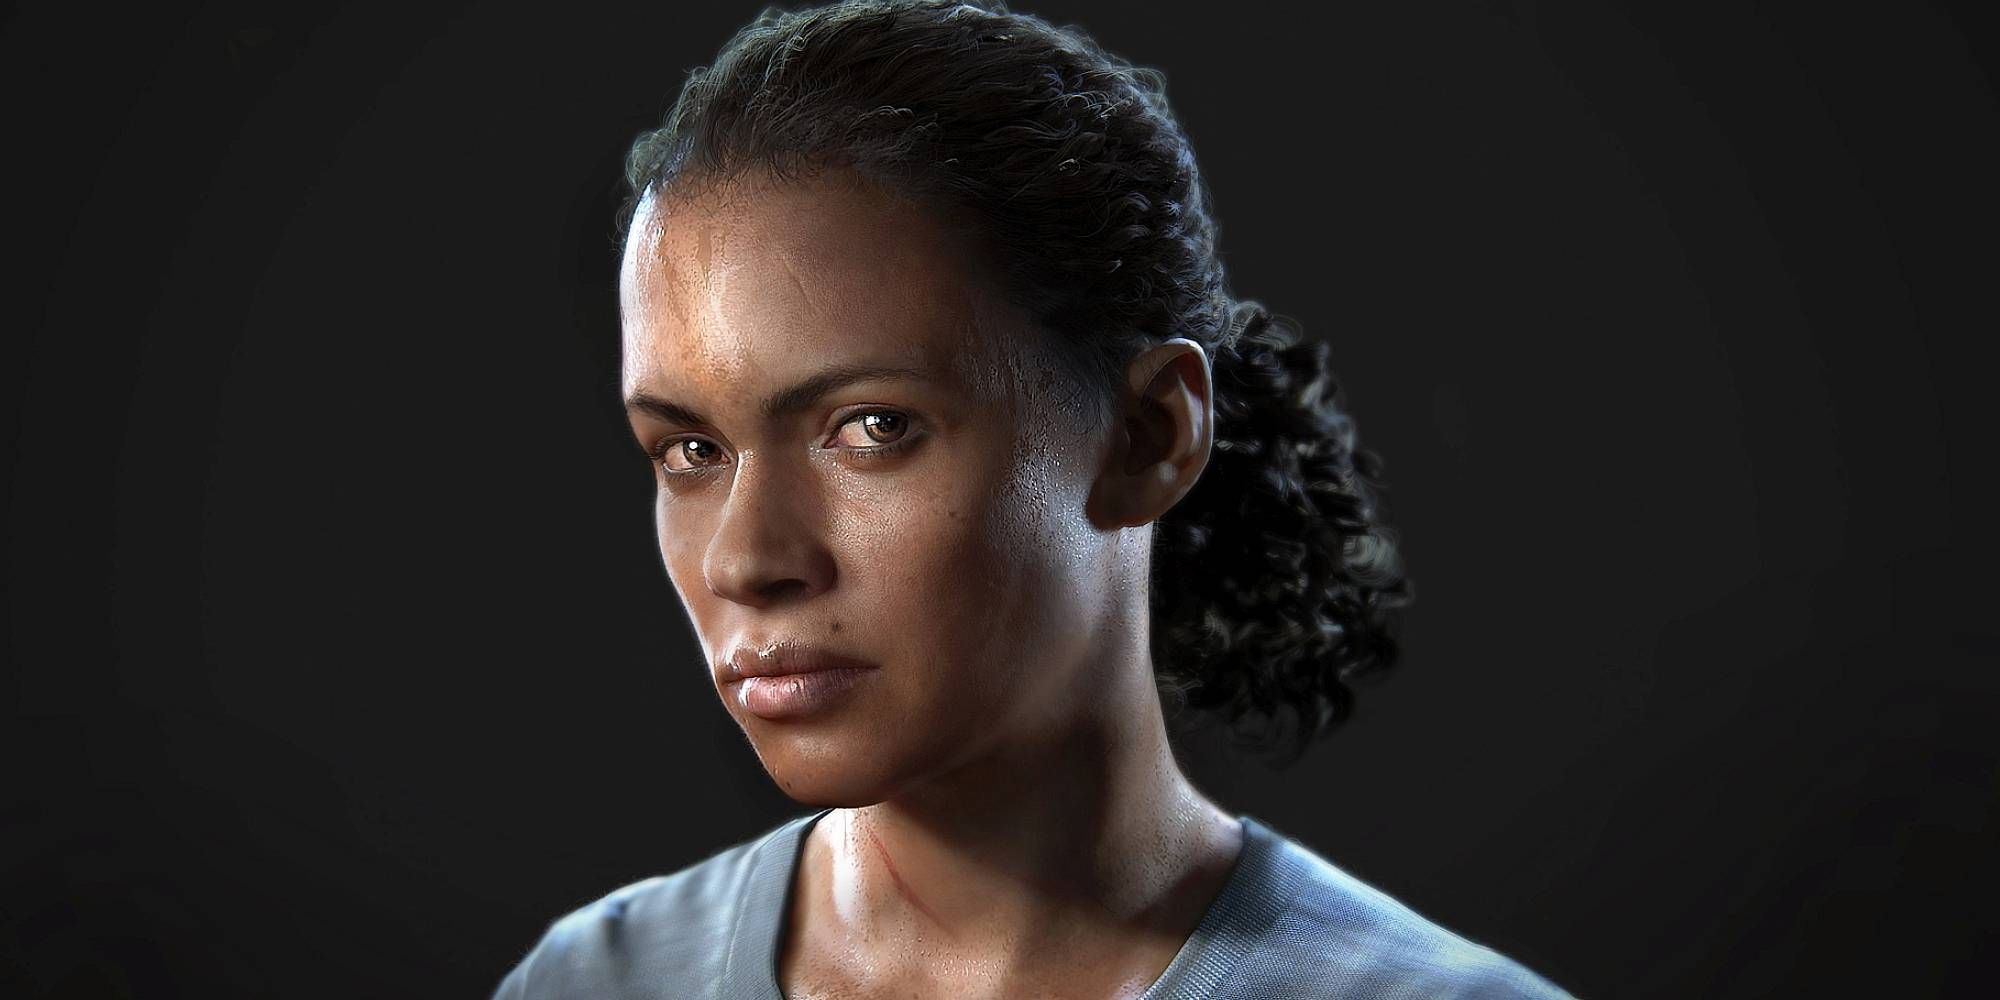 Nadine Ross from Uncharted 4 and Uncharted: Lost Legacy looks to the camera